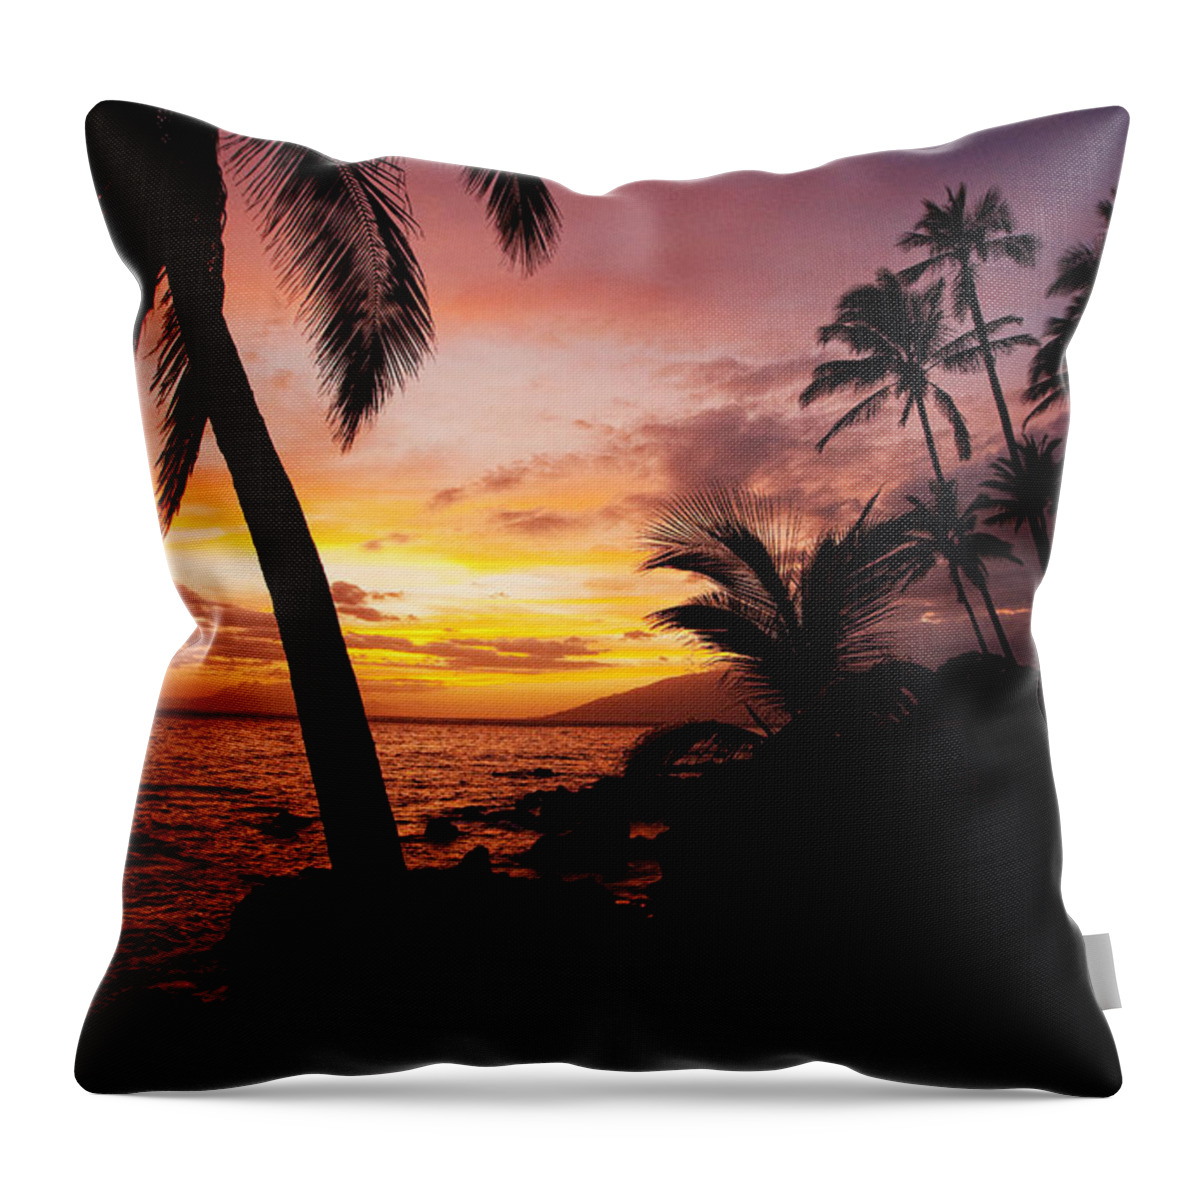 Sunset Palmtrees Kihei Maui Hawaii Seacape Throw Pillow featuring the photograph Charly Young Sunset #1 by James Roemmling